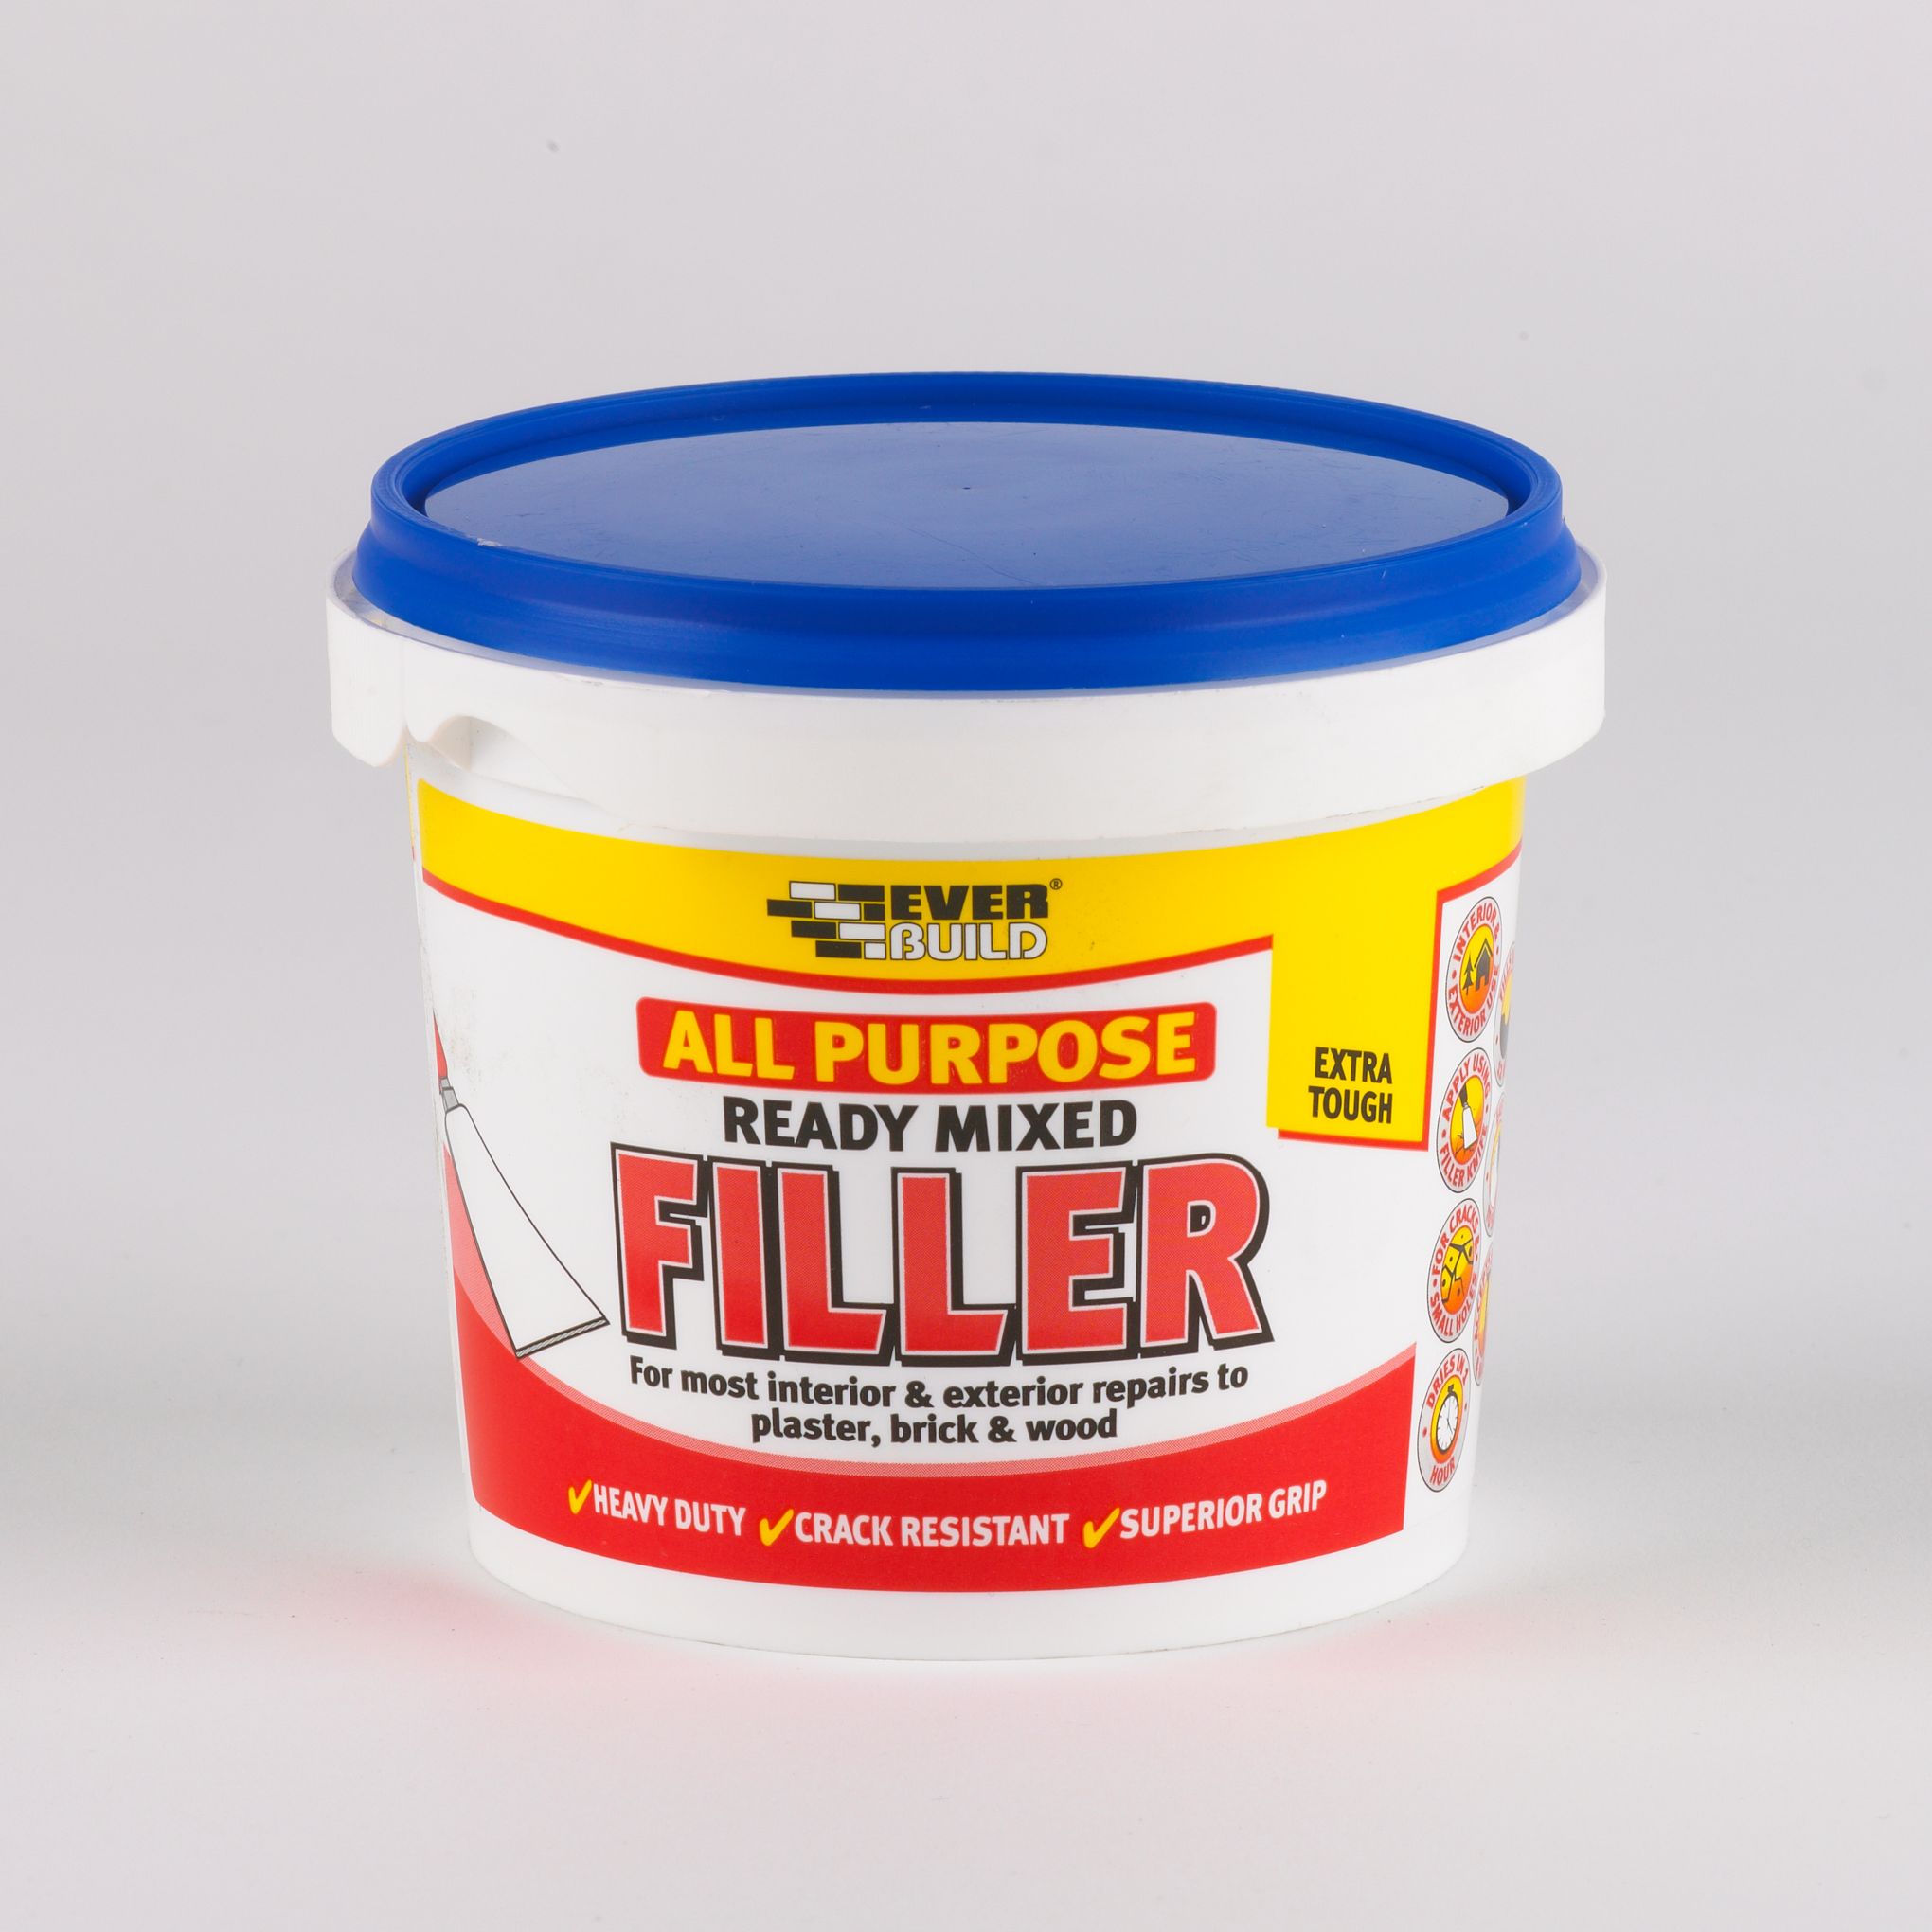 ALL PURPOSE READY MIXED FILLER 1KG